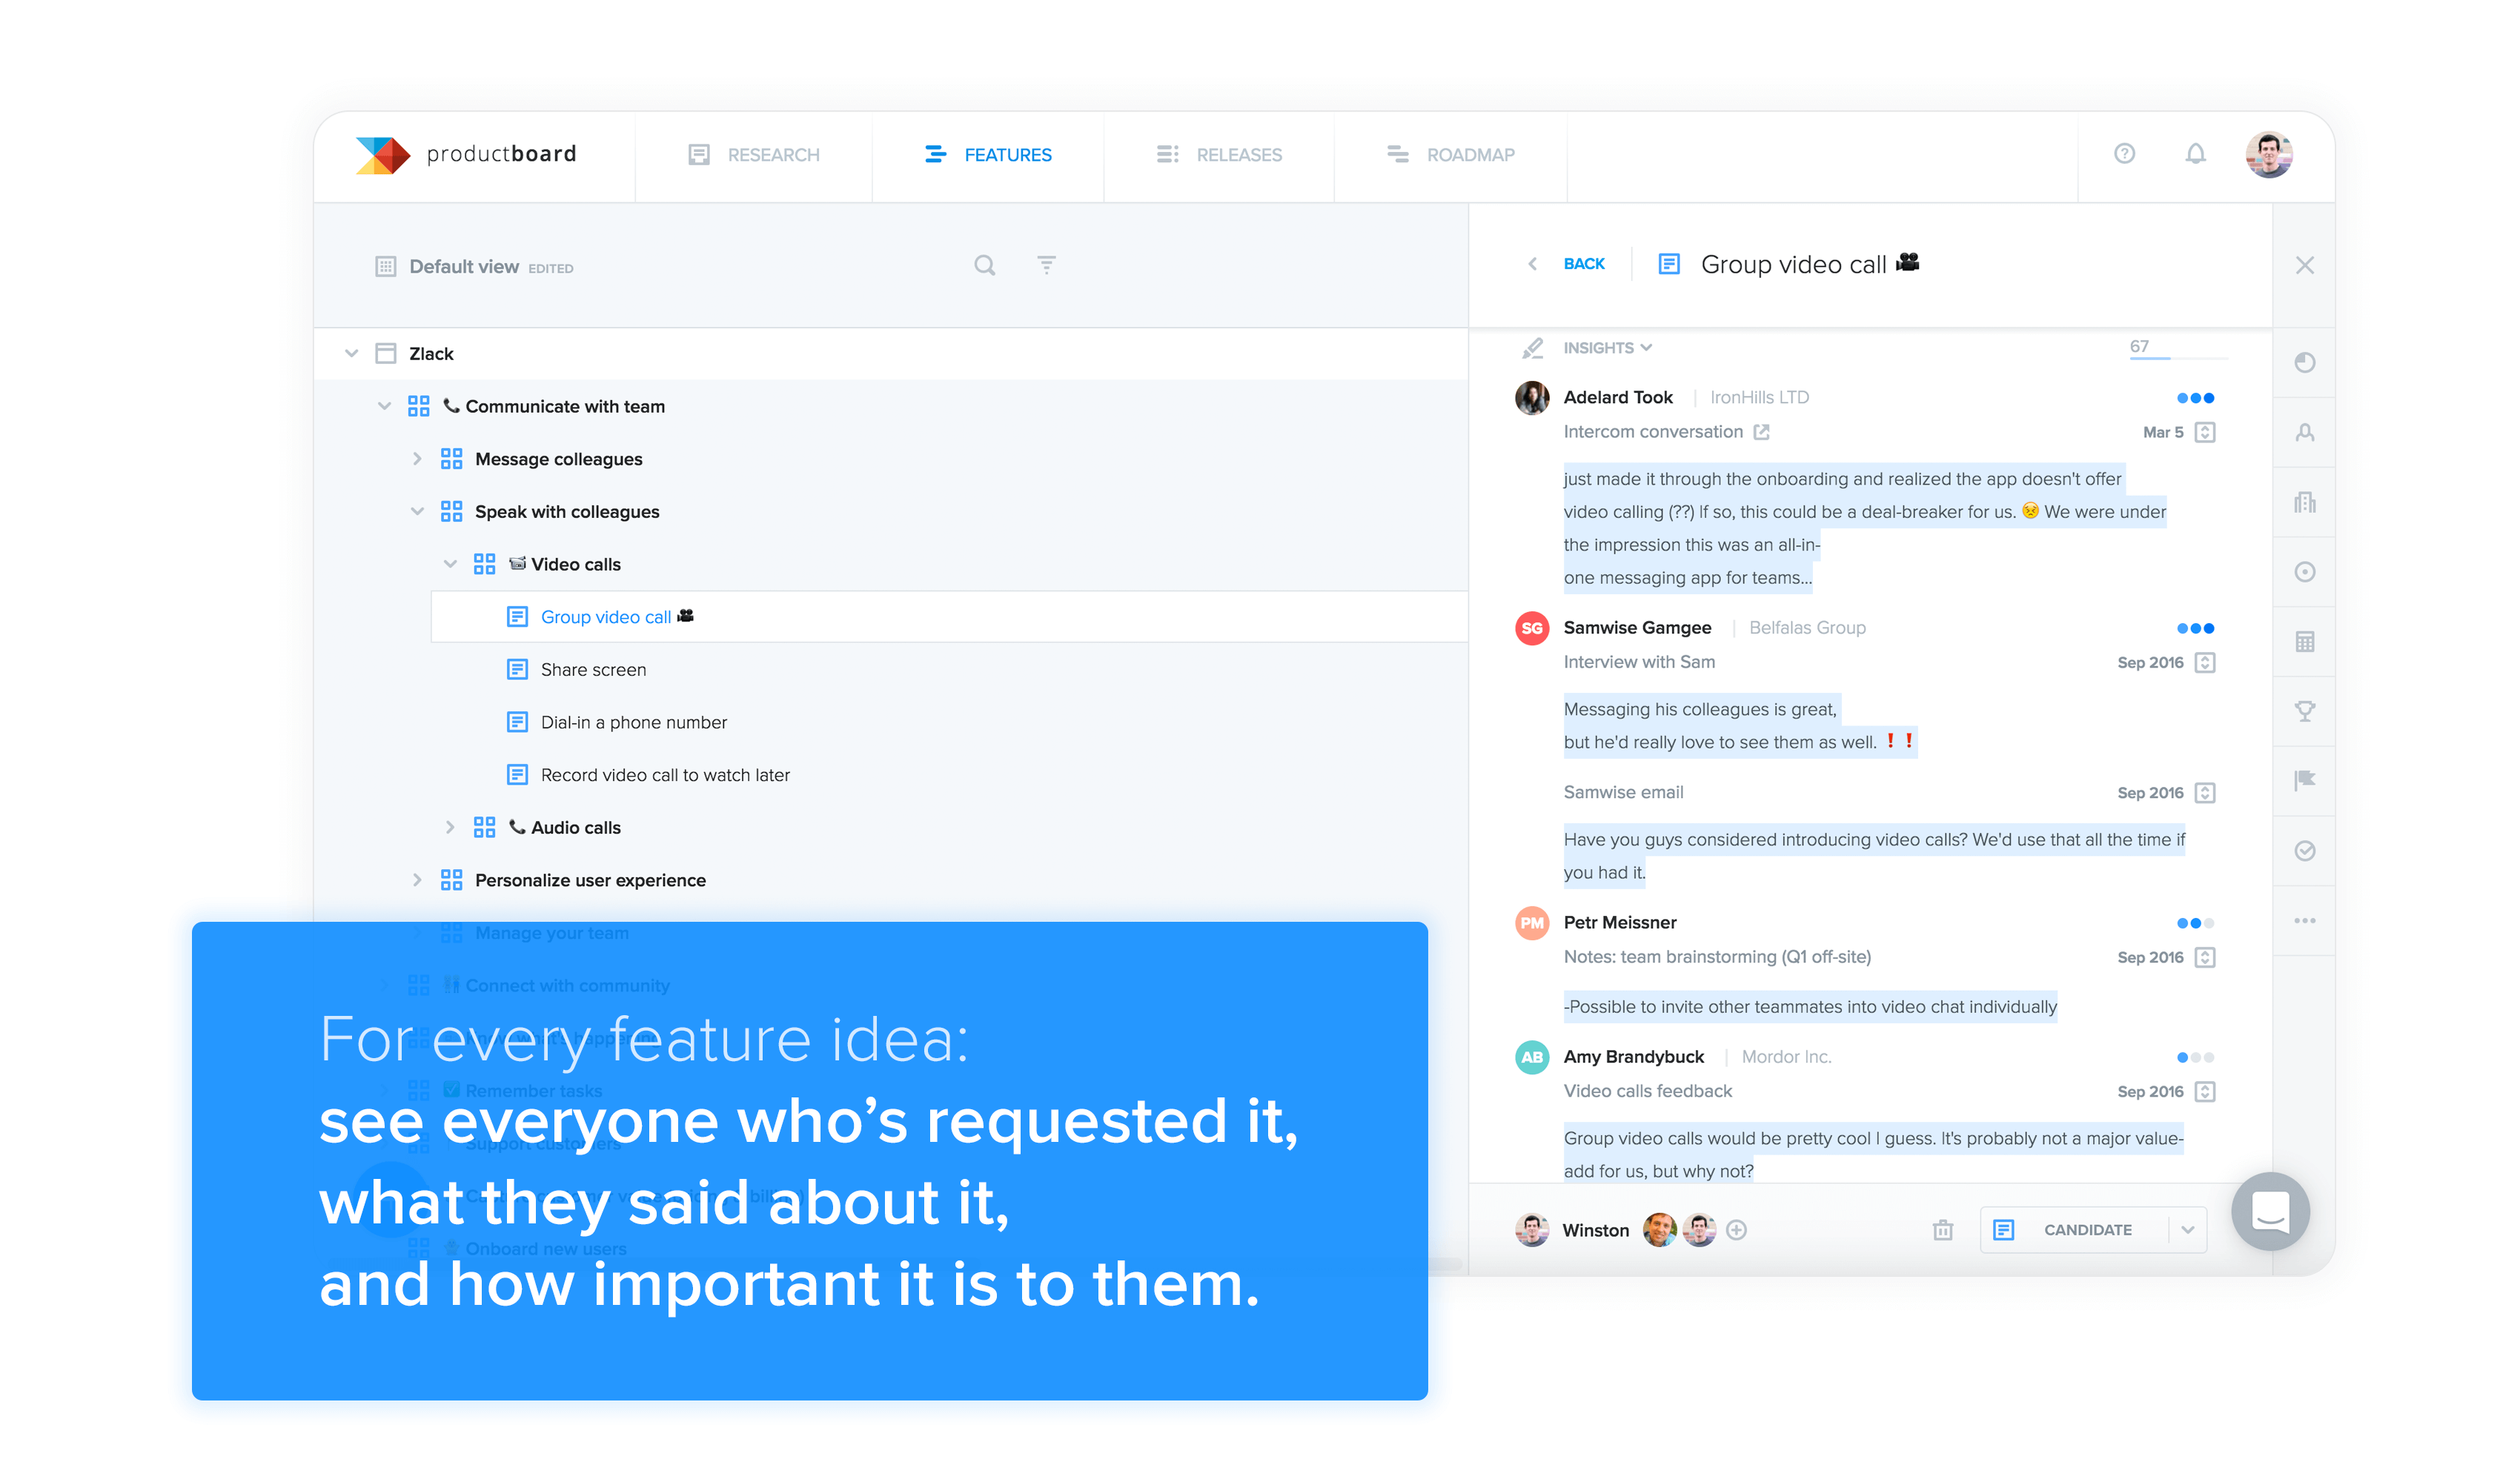 In productboard, you can see everyone who's requested a feature, what they said, and how important it is to them